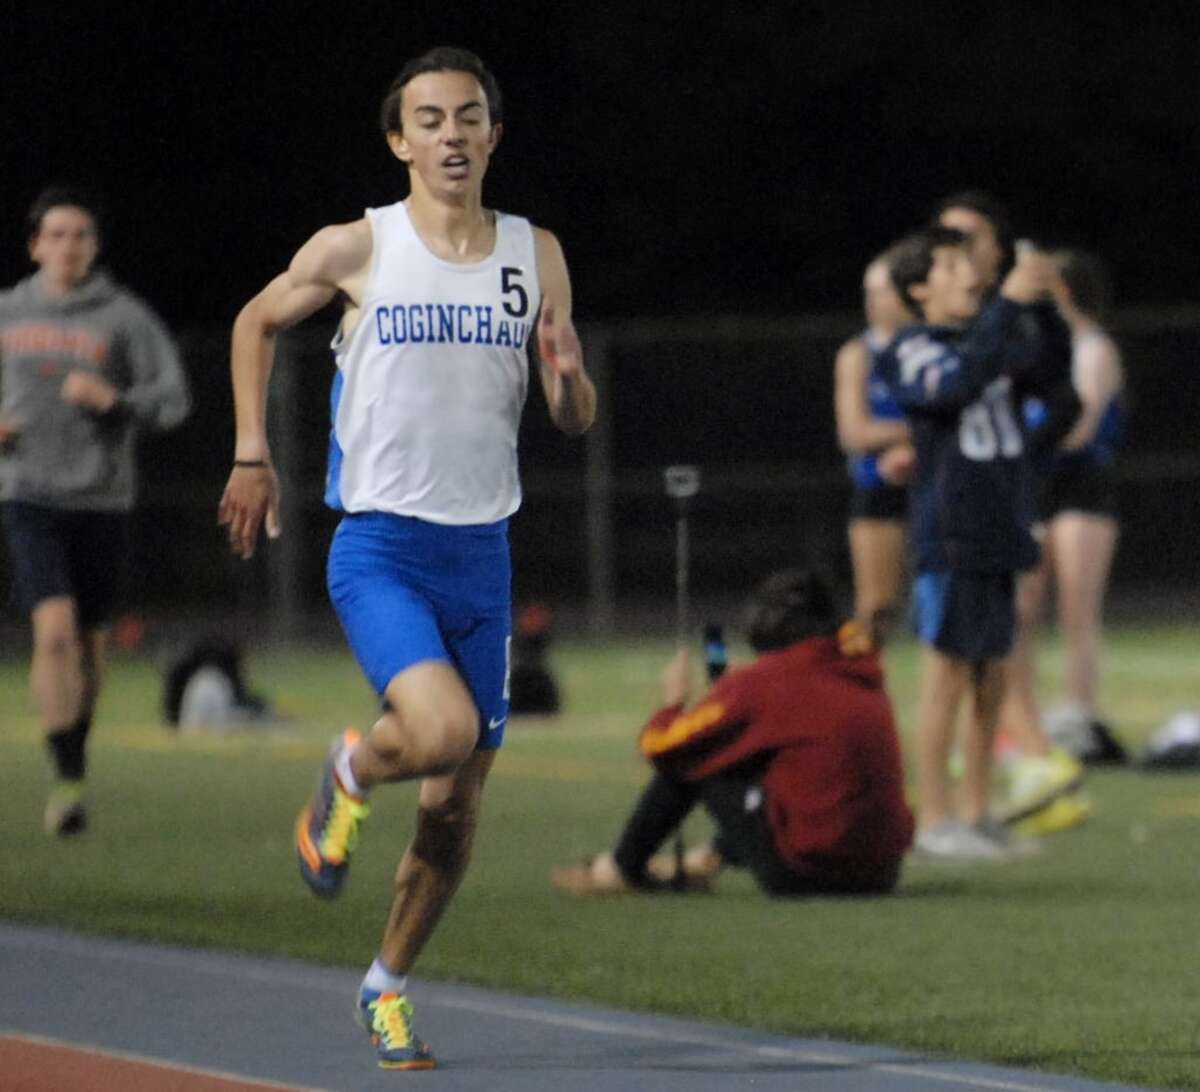 Track and Field Coginchaug's Alberico, Amity's Beaudette shine at